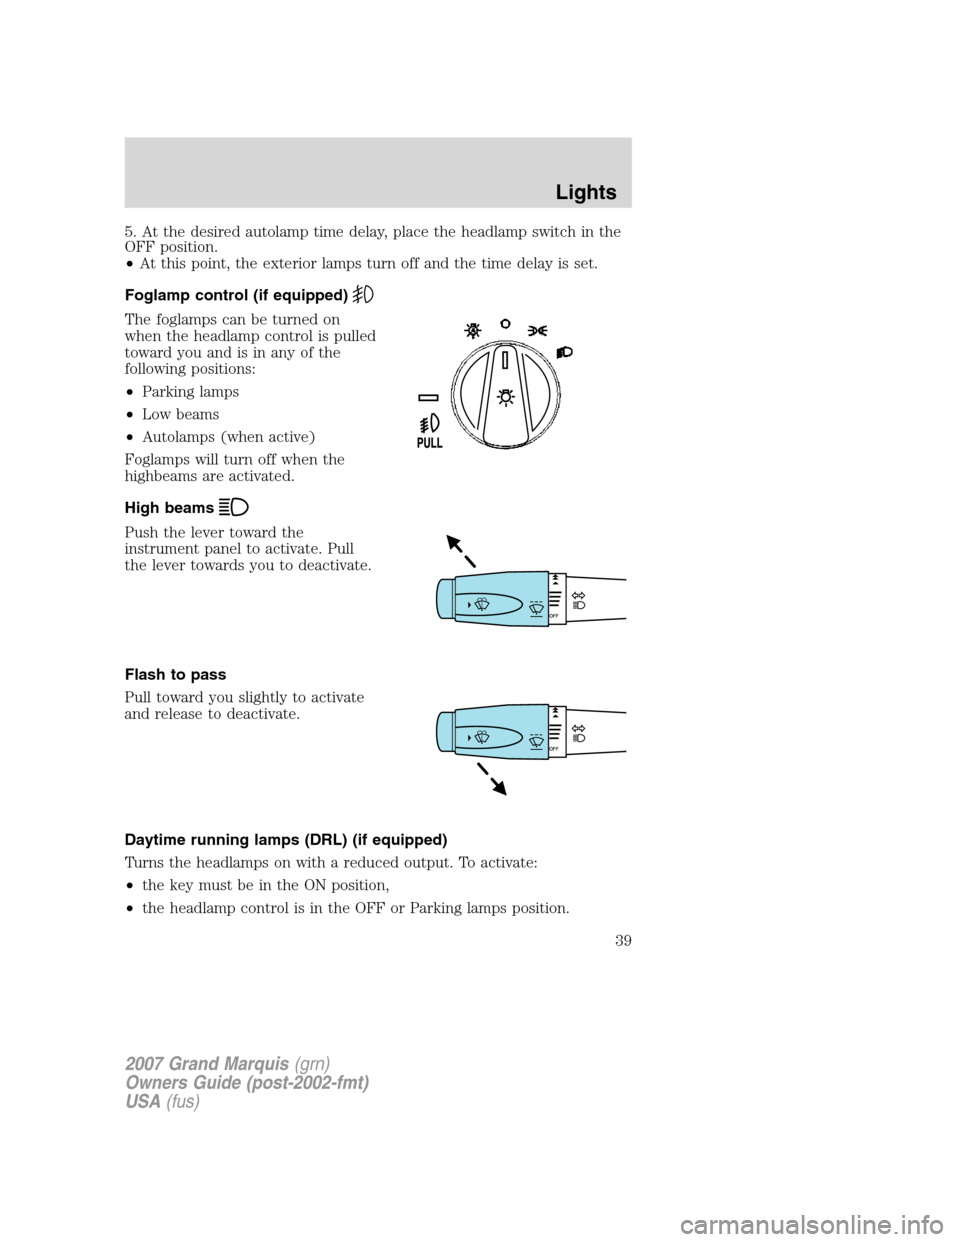 Mercury Grand Marquis 2007  Owners Manuals 5. At the desired autolamp time delay, place the headlamp switch in the
OFF position.
•At this point, the exterior lamps turn off and the time delay is set.
Foglamp control (if equipped)
The foglamp